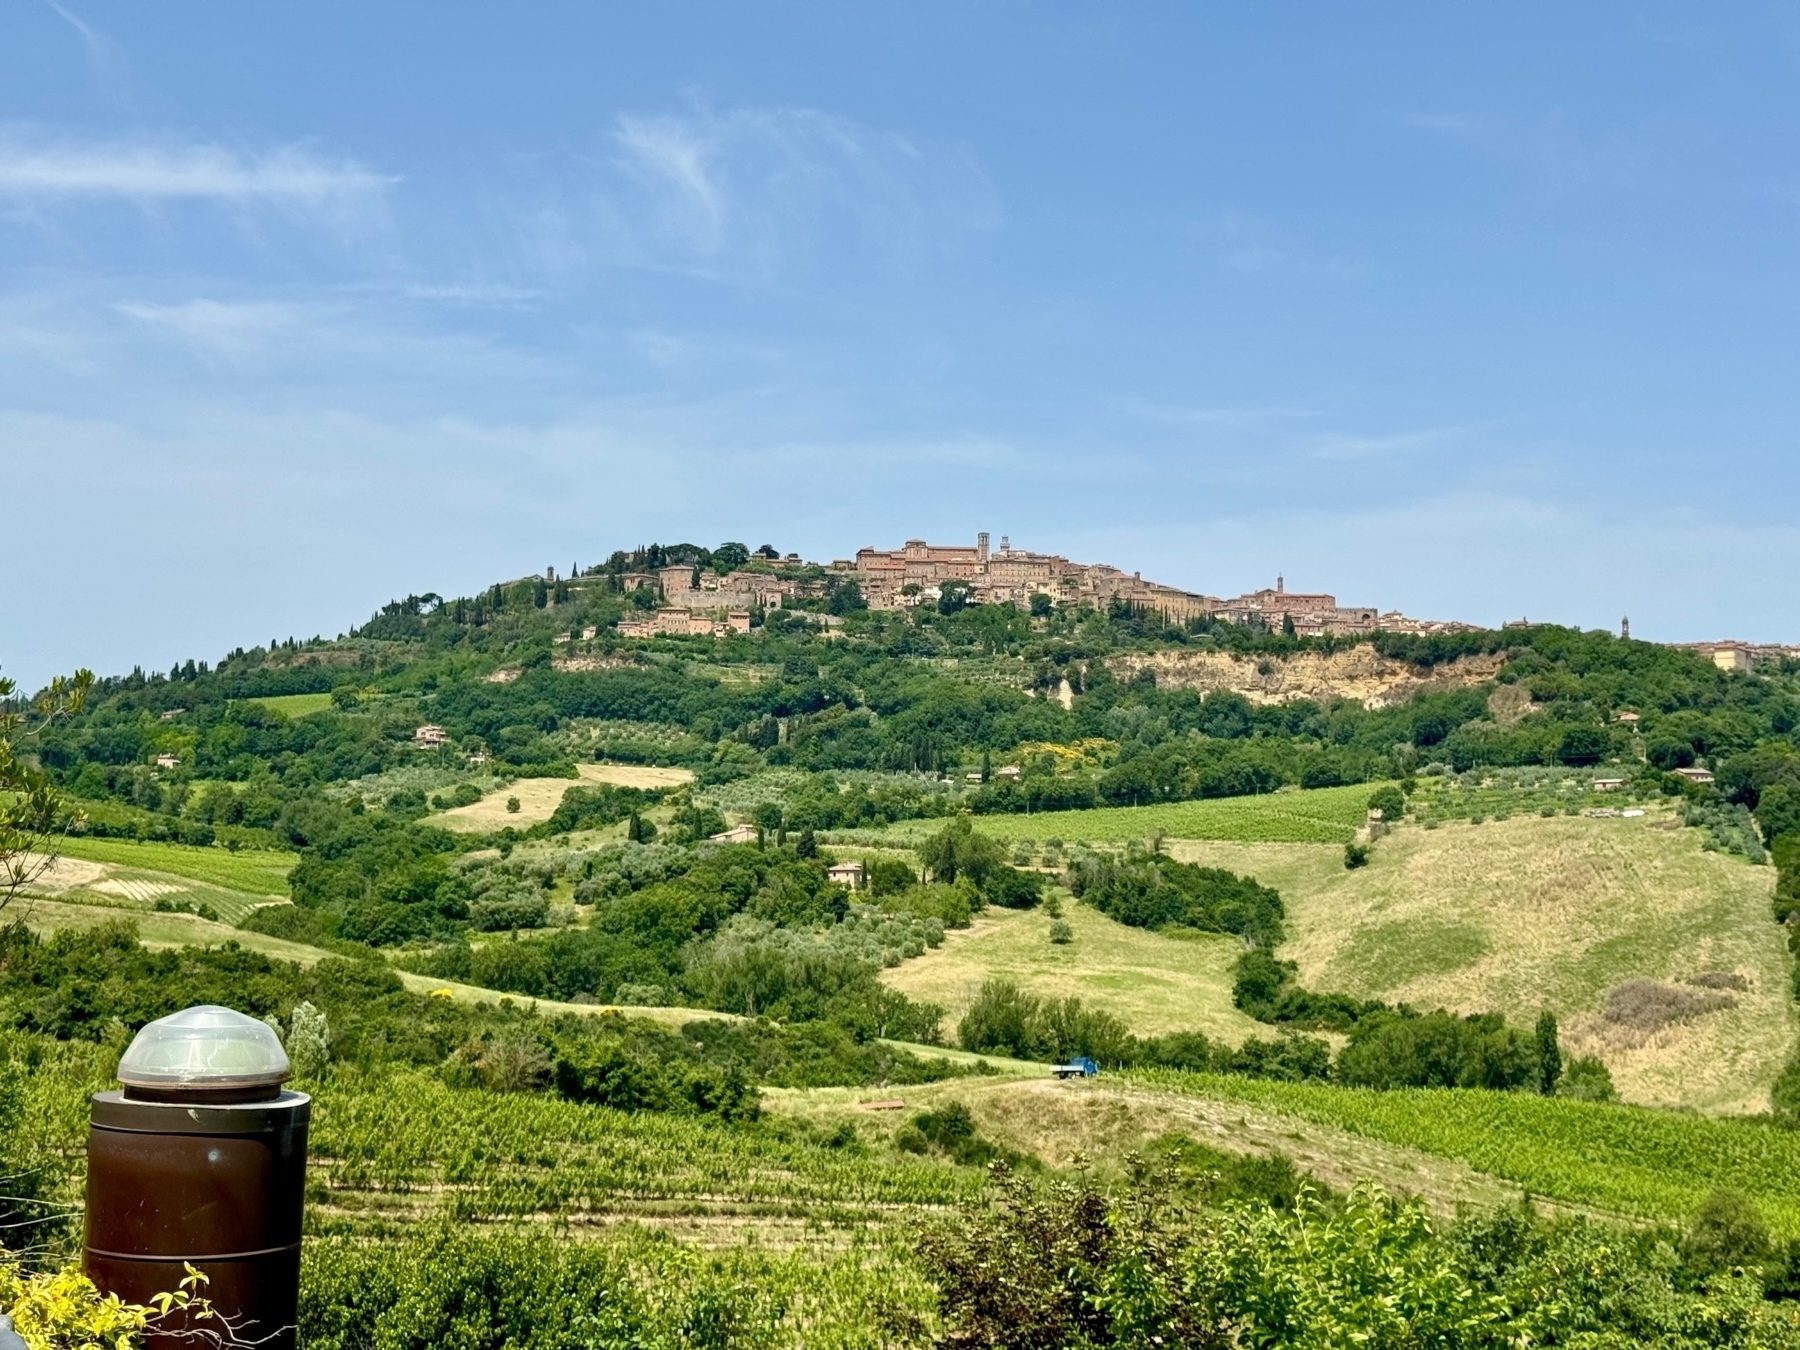 A picturesque landscape featuring a historic town on a hilltop surrounded by lush green fields and vineyards. The town has a mix of medieval buildings, which blend seamlessly into the verdant landscape.